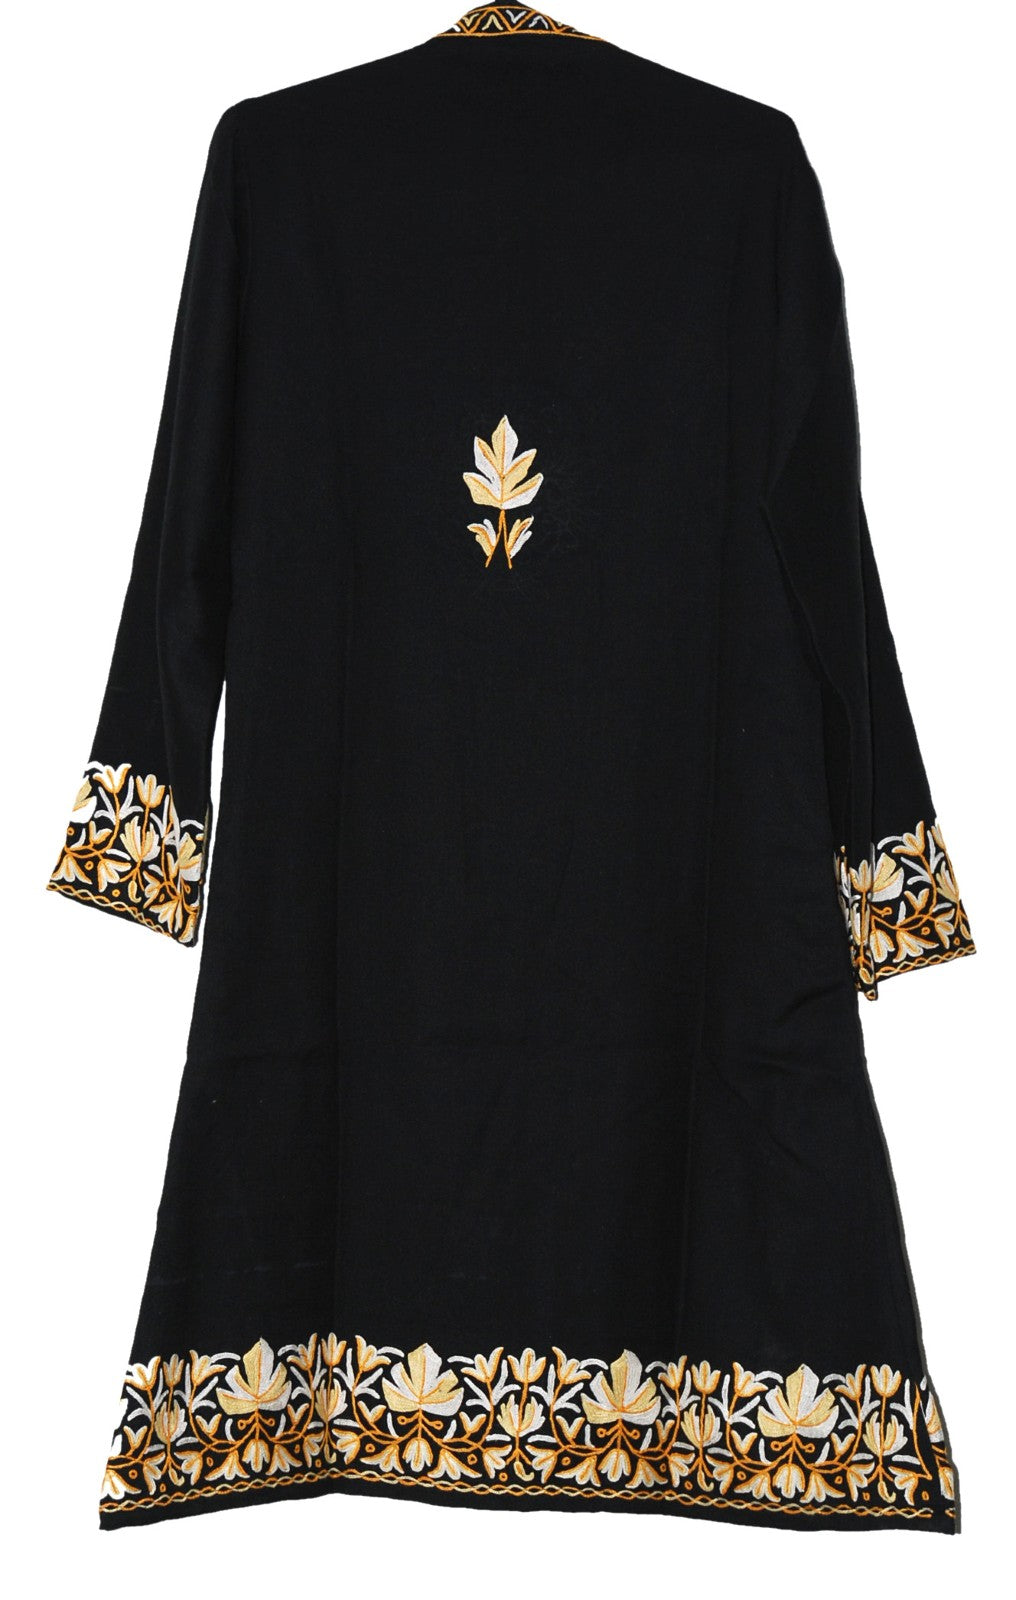 Woolen Coat Long Jacket Black, Cream and Yellow Embroidery #BD-120